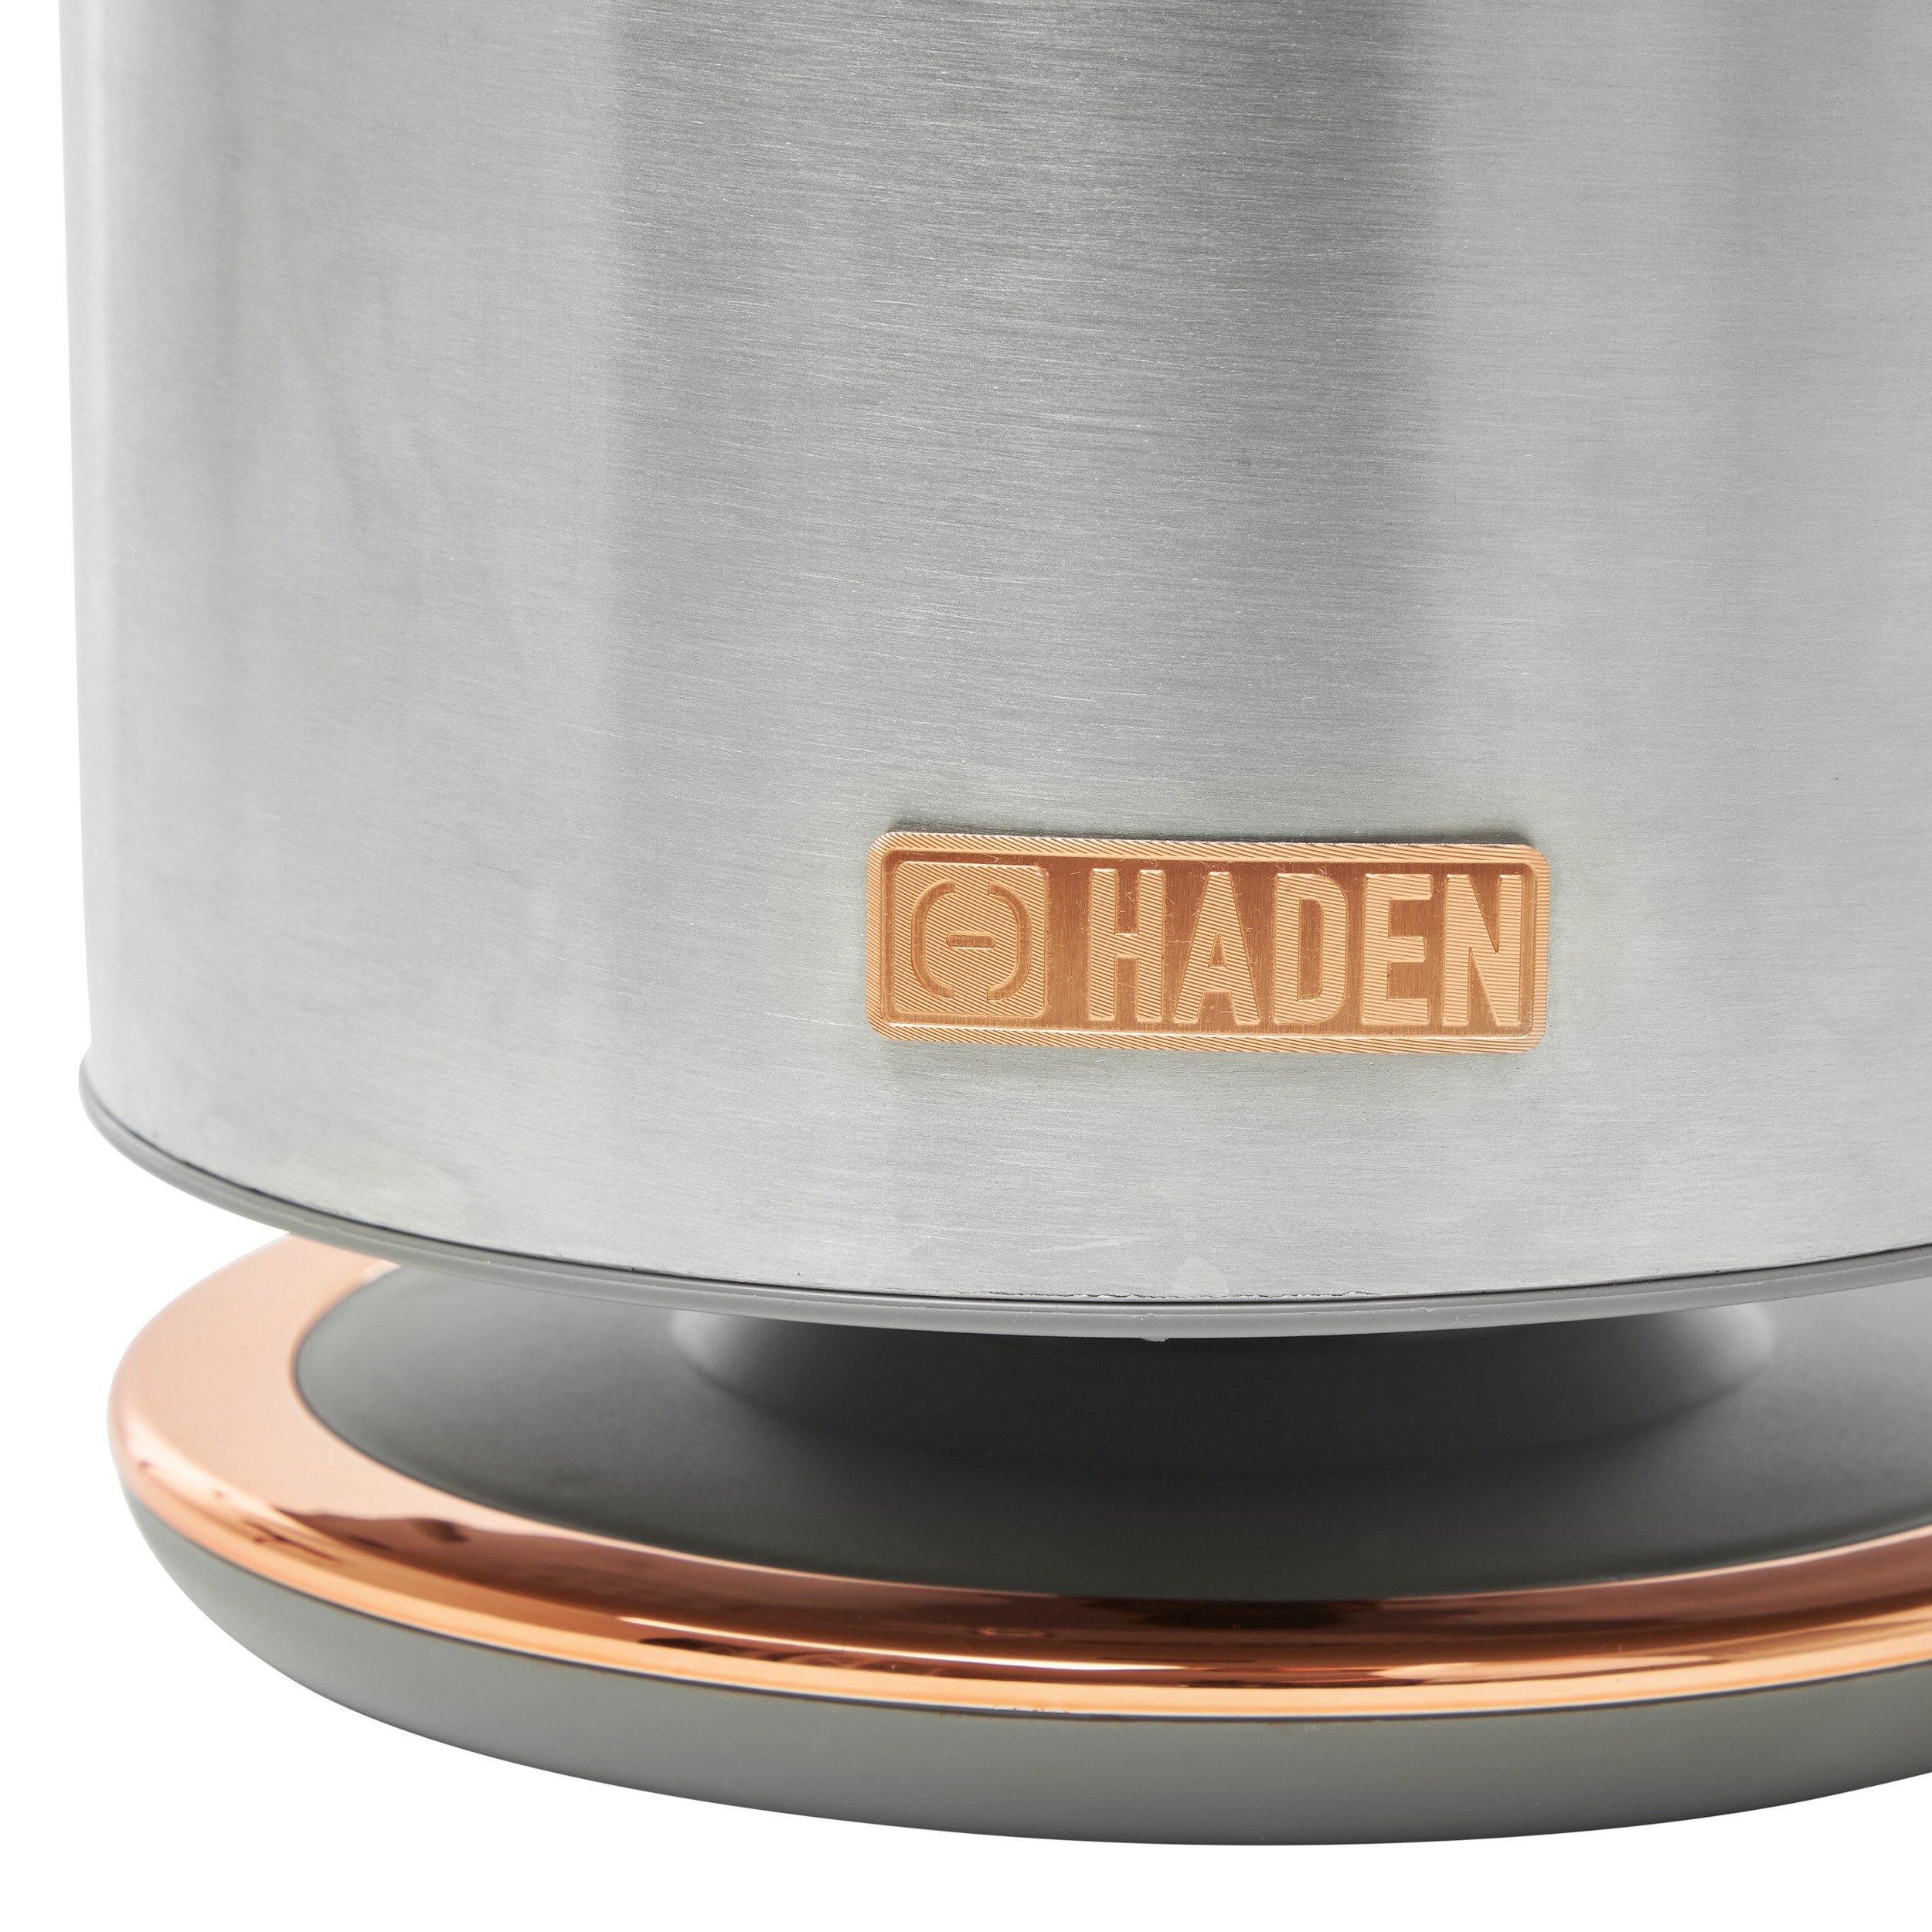 https://ak1.ostkcdn.com/images/products/is/images/direct/7a68014c8a22c2a6e337b1b26613cc7c02d23692/Haden-Heritage-1.7-Liter-Stainless-Steel-Electric-Tea-Kettle.jpg